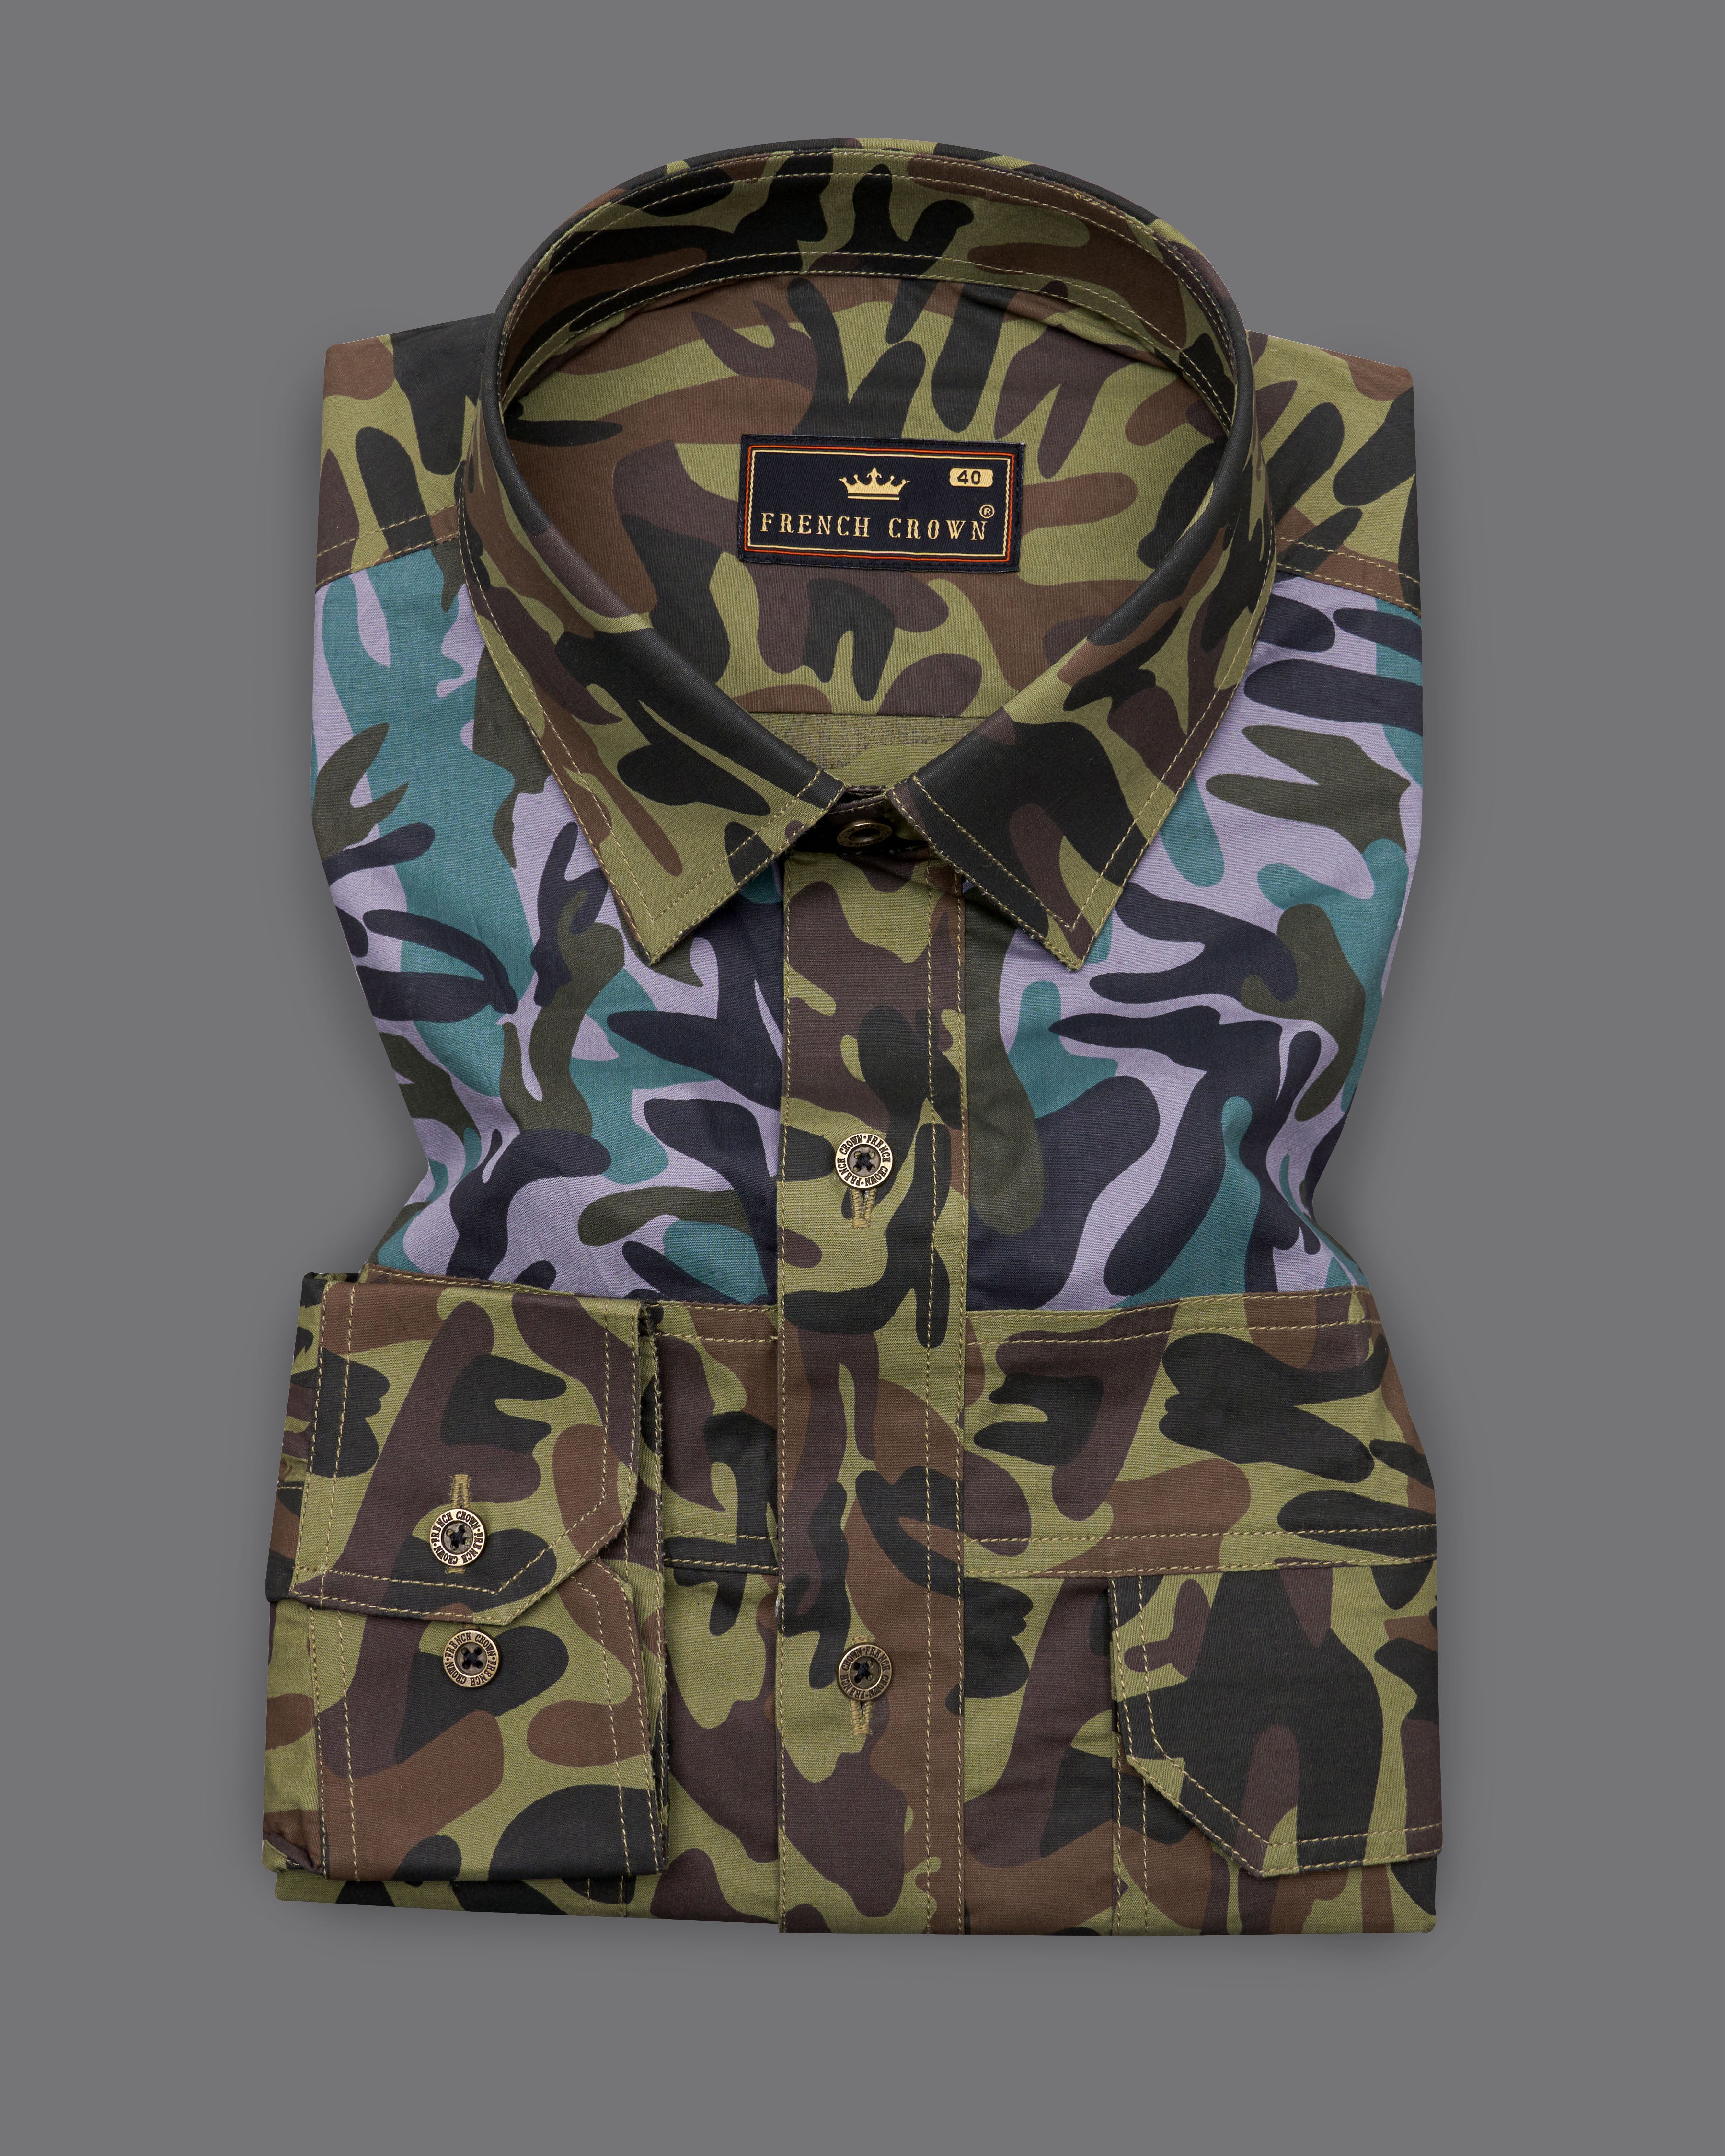 Limed Green and Thunder Black and Multicolour Camouflage Royal Oxford Designer Overshirt 9451-MB-OS-P409-38, 9451-MB-OS-P409-H-38, 9451-MB-OS-P409-39, 9451-MB-OS-P409-H-39, 9451-MB-OS-P409-40, 9451-MB-OS-P409-H-40, 9451-MB-OS-P409-42, 9451-MB-OS-P409-H-42, 9451-MB-OS-P409-44, 9451-MB-OS-P409-H-44, 9451-MB-OS-P409-46, 9451-MB-OS-P409-H-46, 9451-MB-OS-P409-48, 9451-MB-OS-P409-H-48, 9451-MB-OS-P409-50, 9451-MB-OS-P409-H-50, 9451-MB-OS-P409-52, 9451-MB-OS-P409-H-52